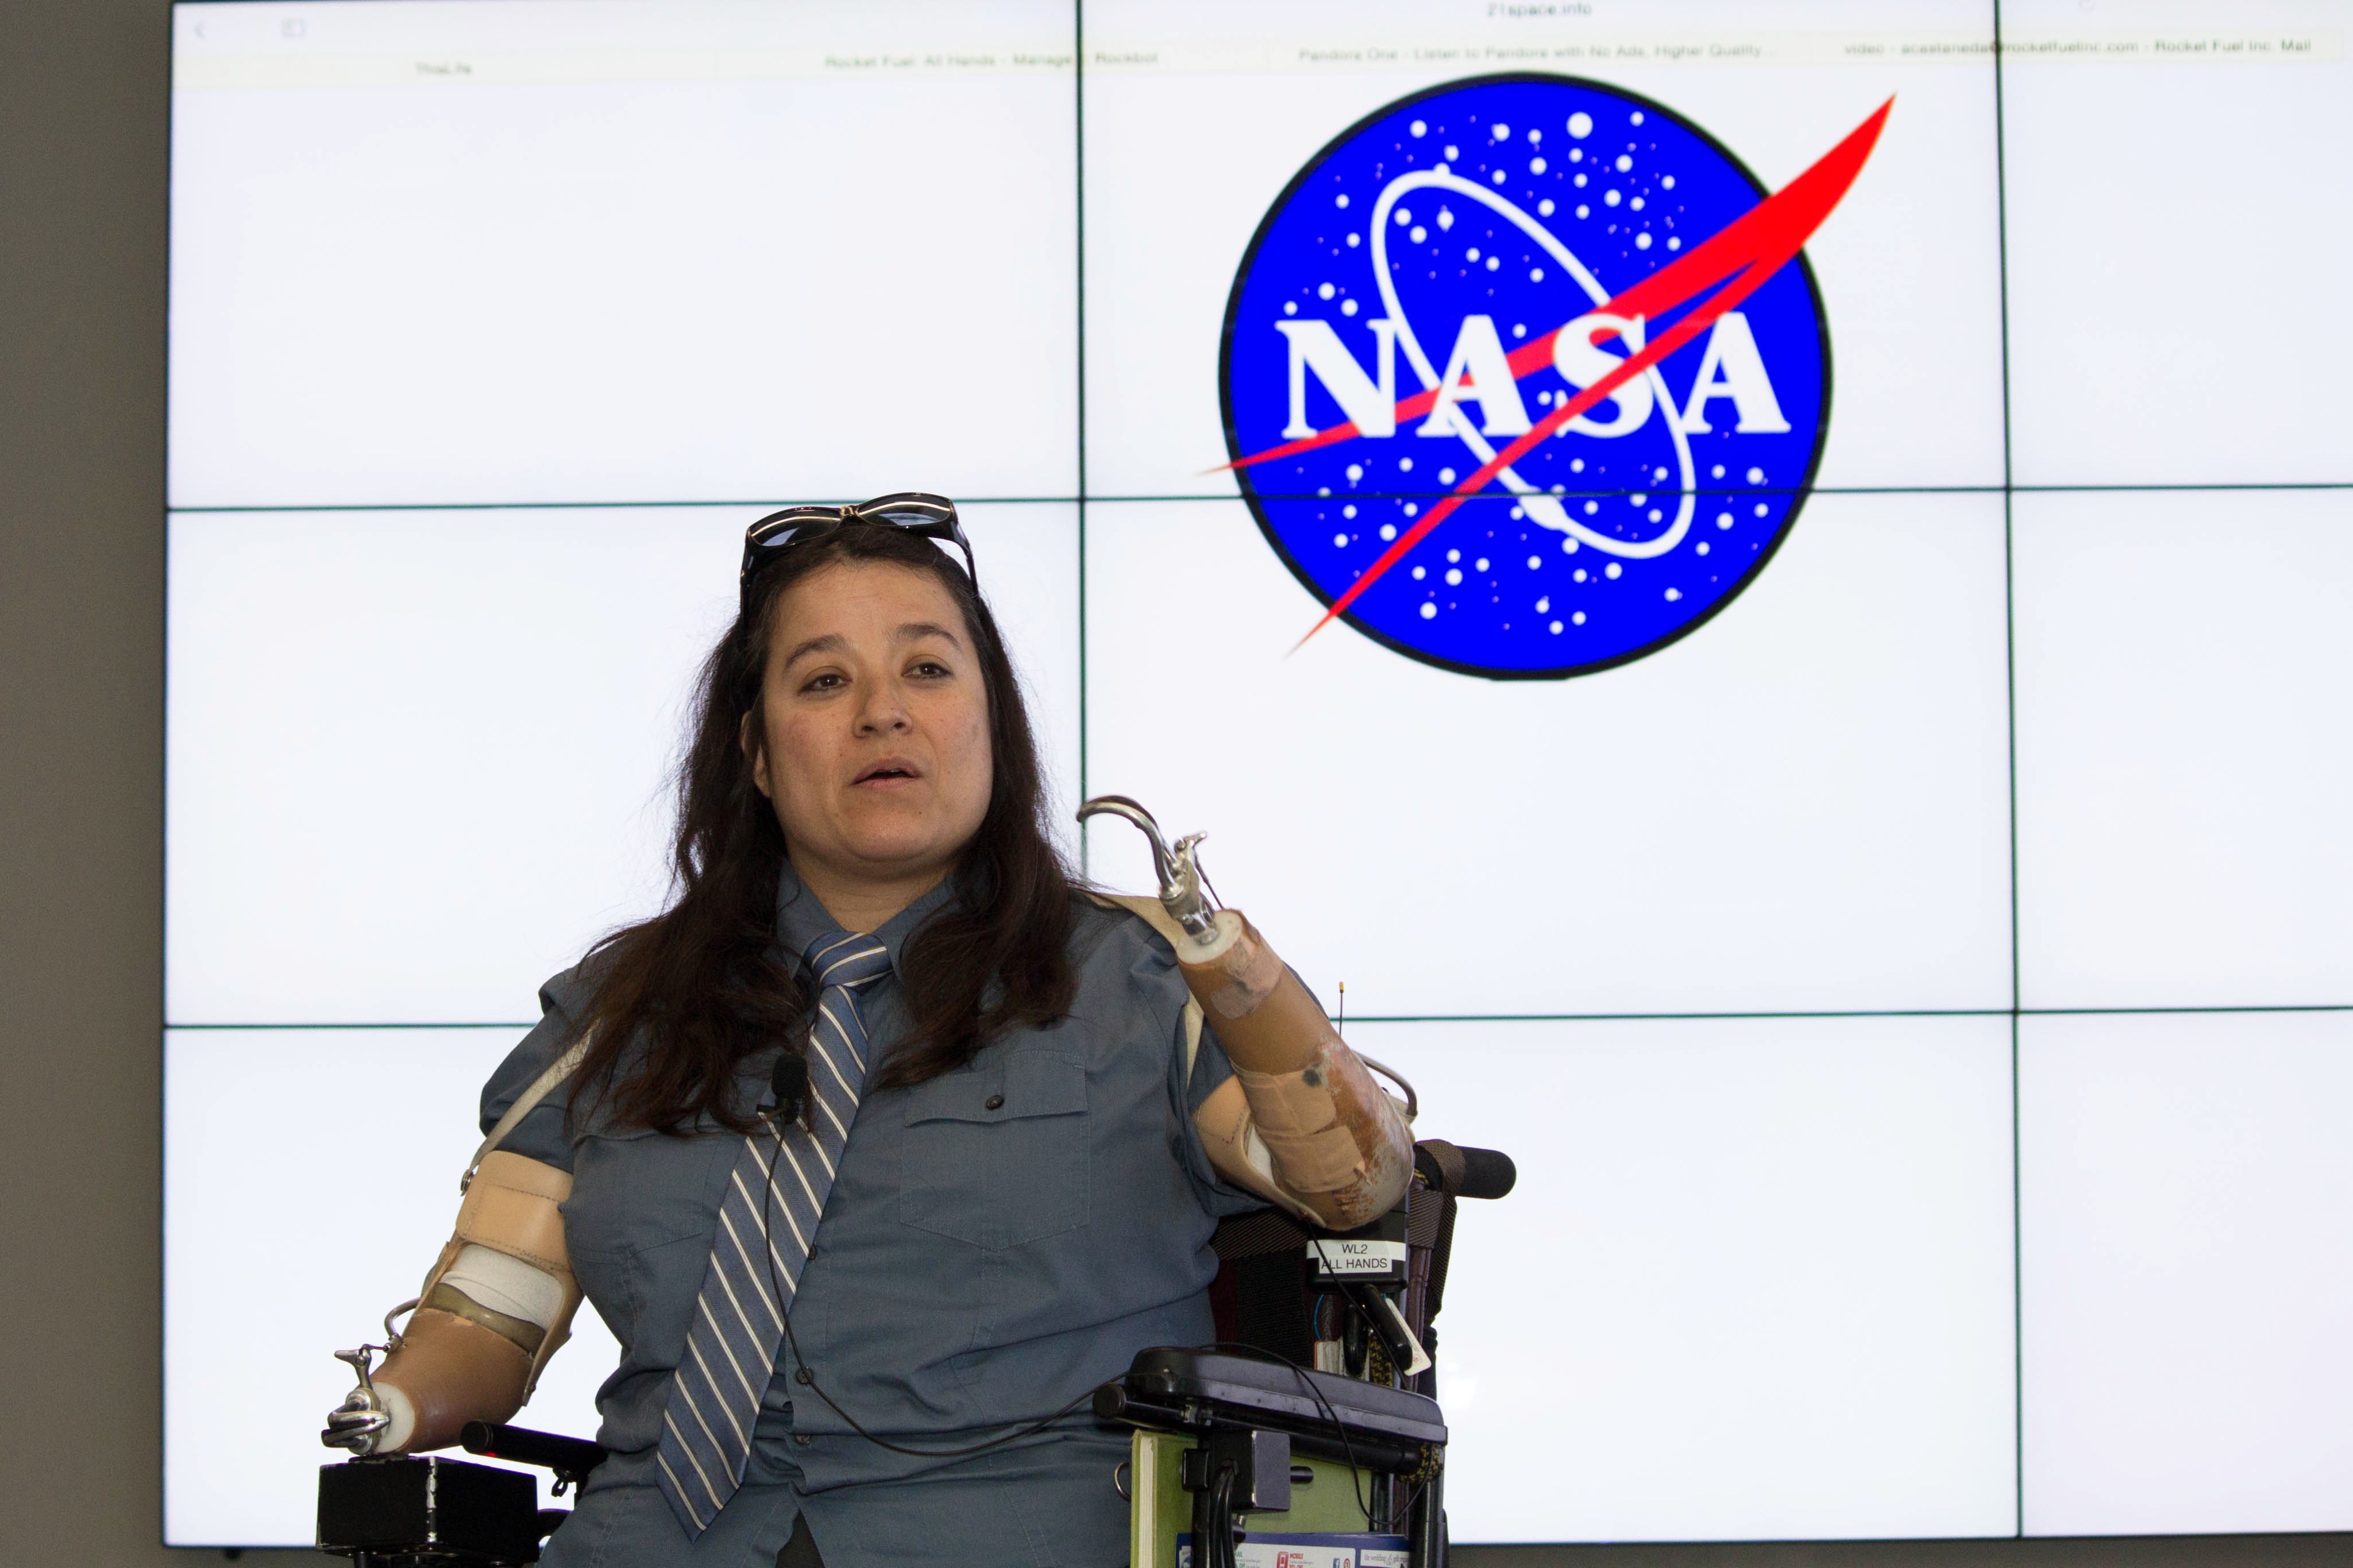 Dana Bolles speaking from her motorized wheelchair in front of a NASA logo.